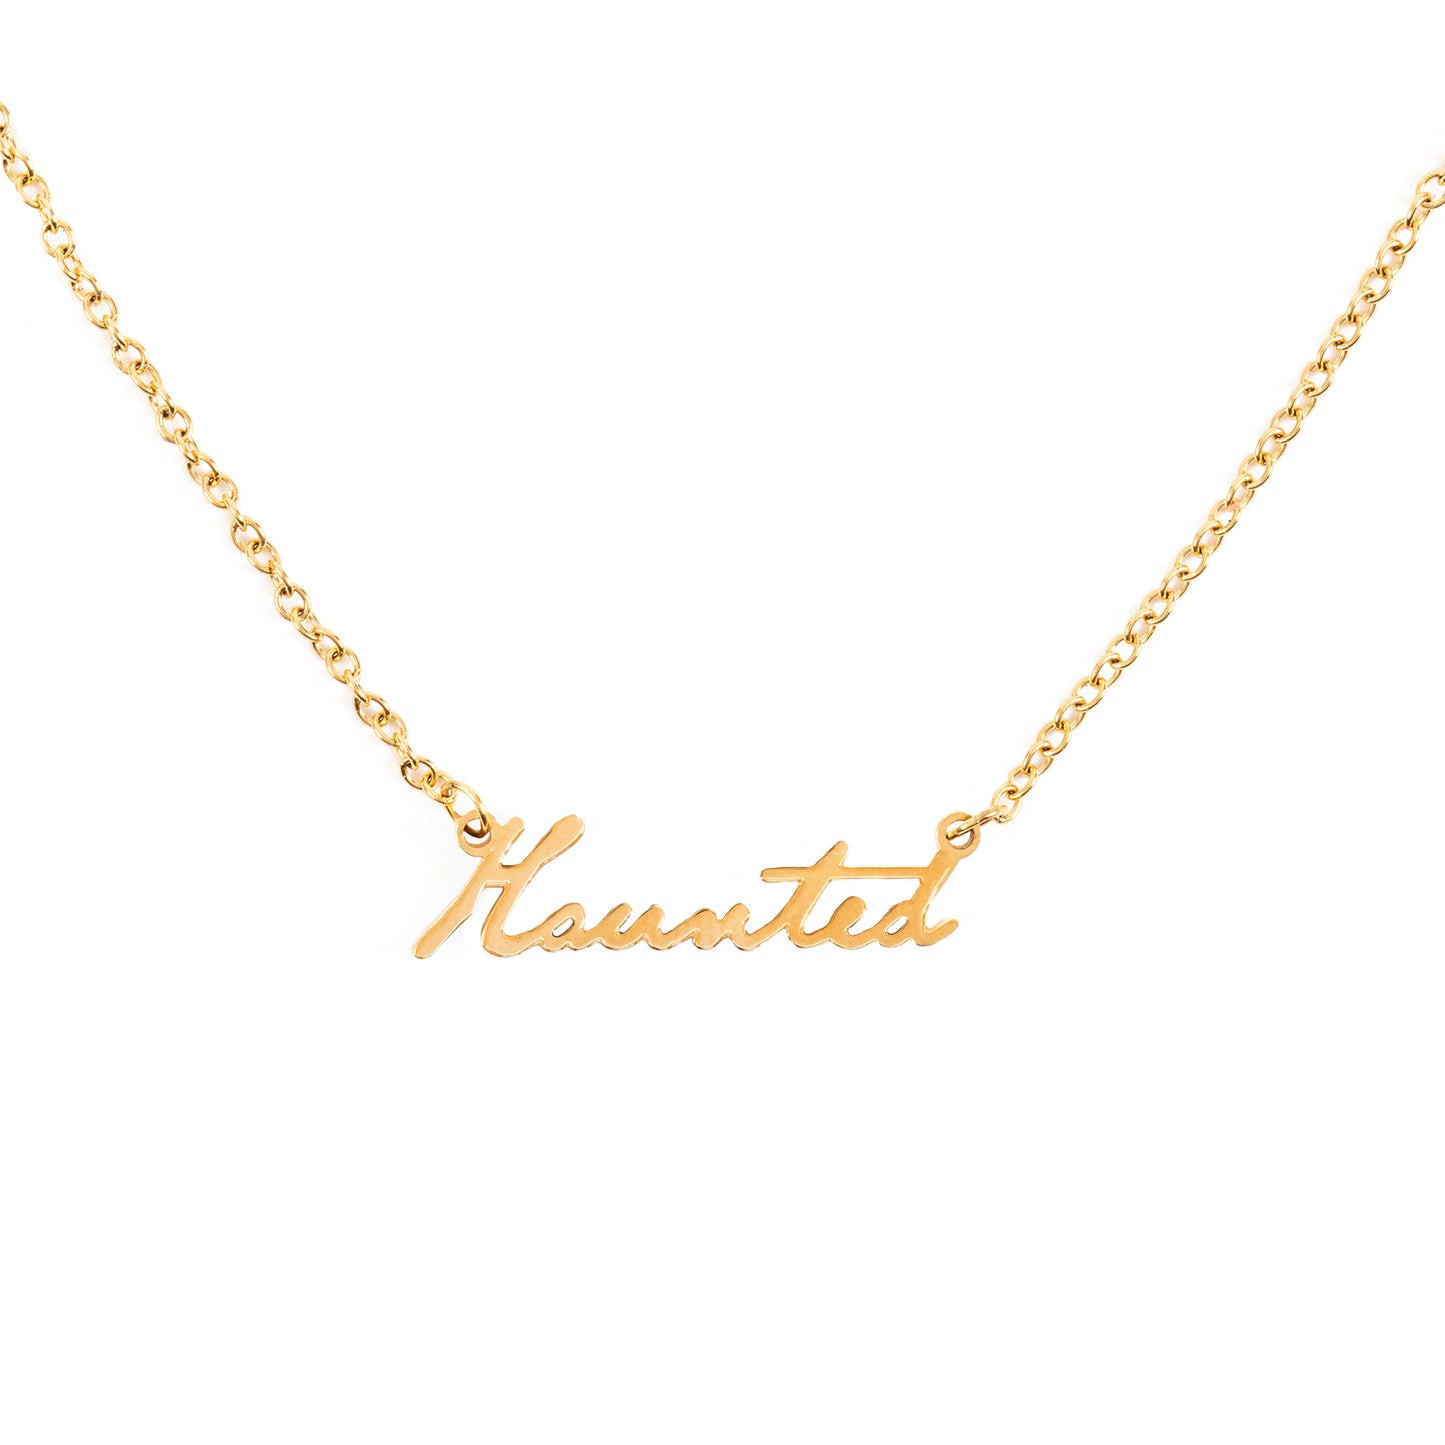 Haunted Gold-Plated Necklace